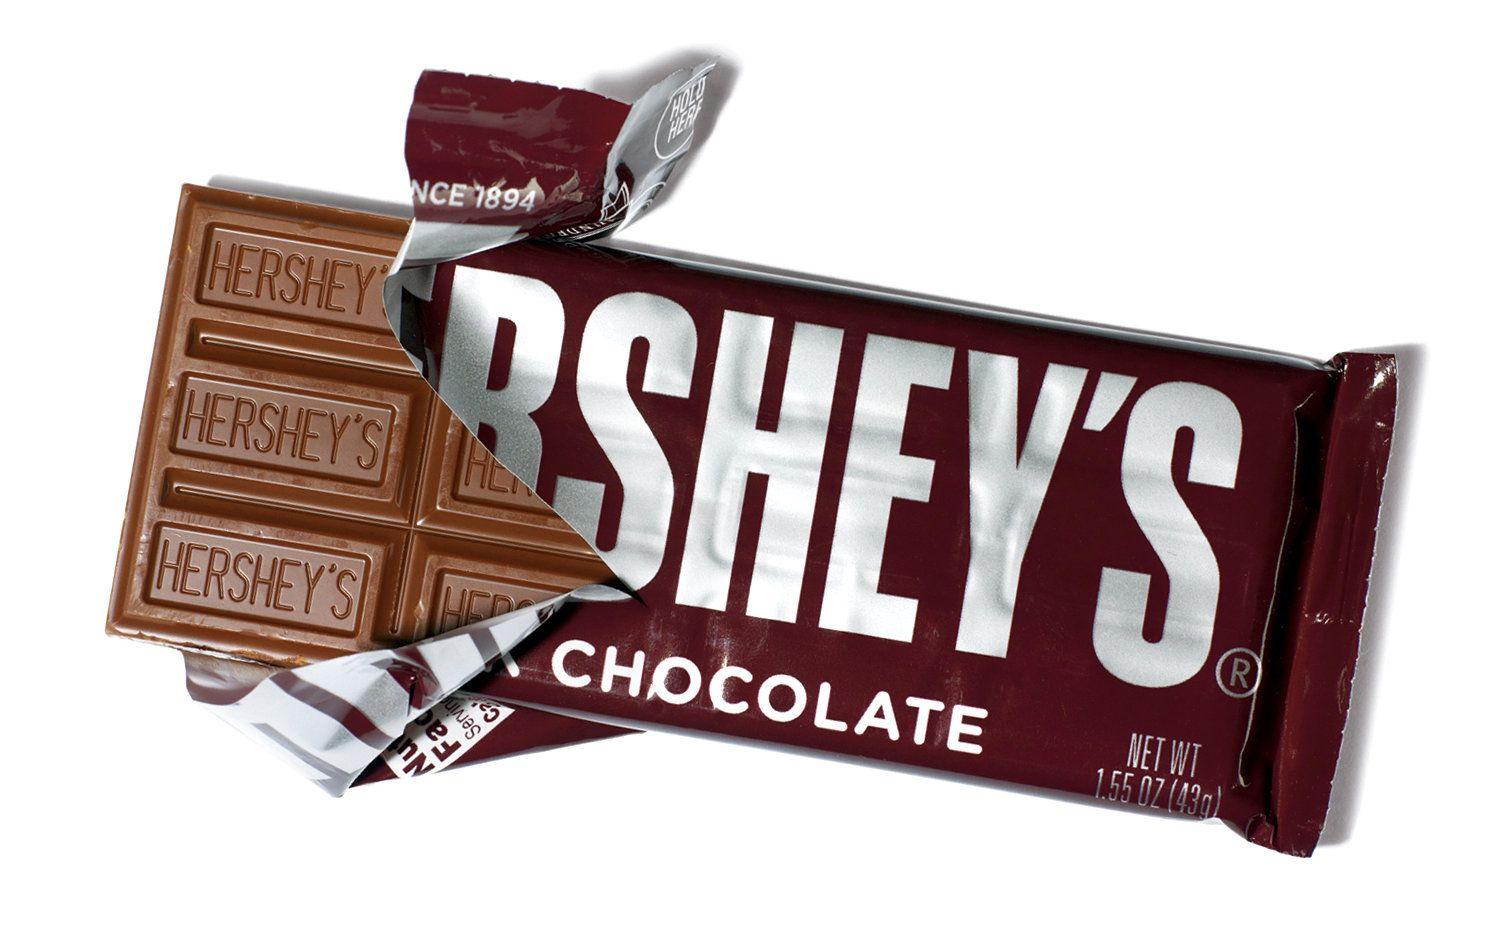 A Hershey's Milk Chocolate bar contains 9 mg of caffeine per serving